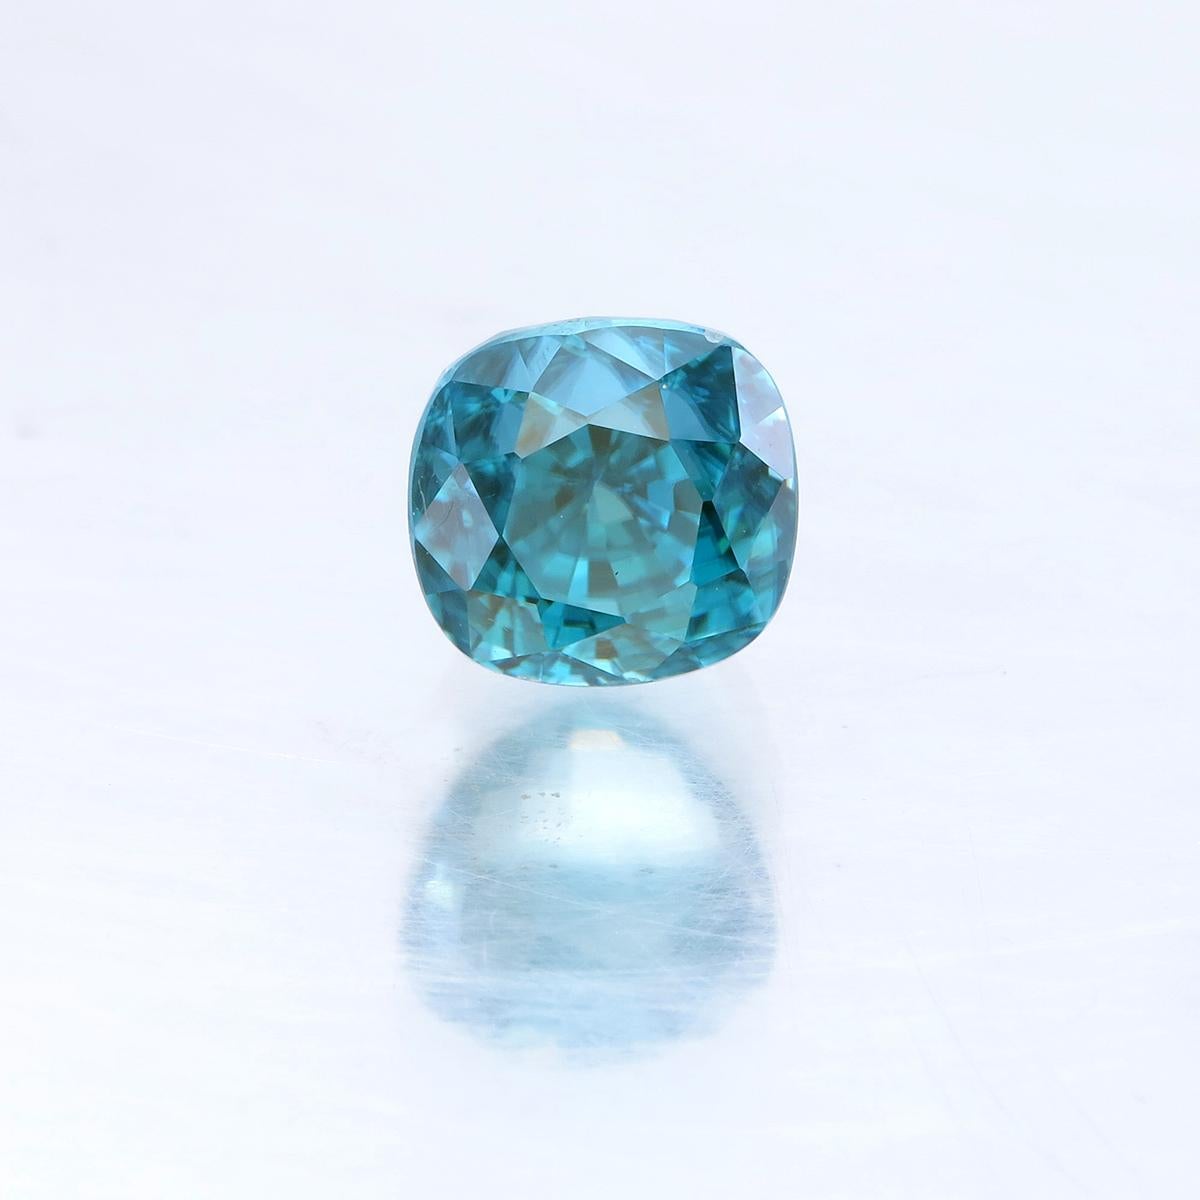 Whole sale price starting 178 dollar per carat !
Investment grade Blue Zircon
Rare sparkling Blue Zircon is only found at one place in the world at Ratanakiri province in Northeast Cambodia. Blue Zircon in this vivid blue color is very rare indeed.